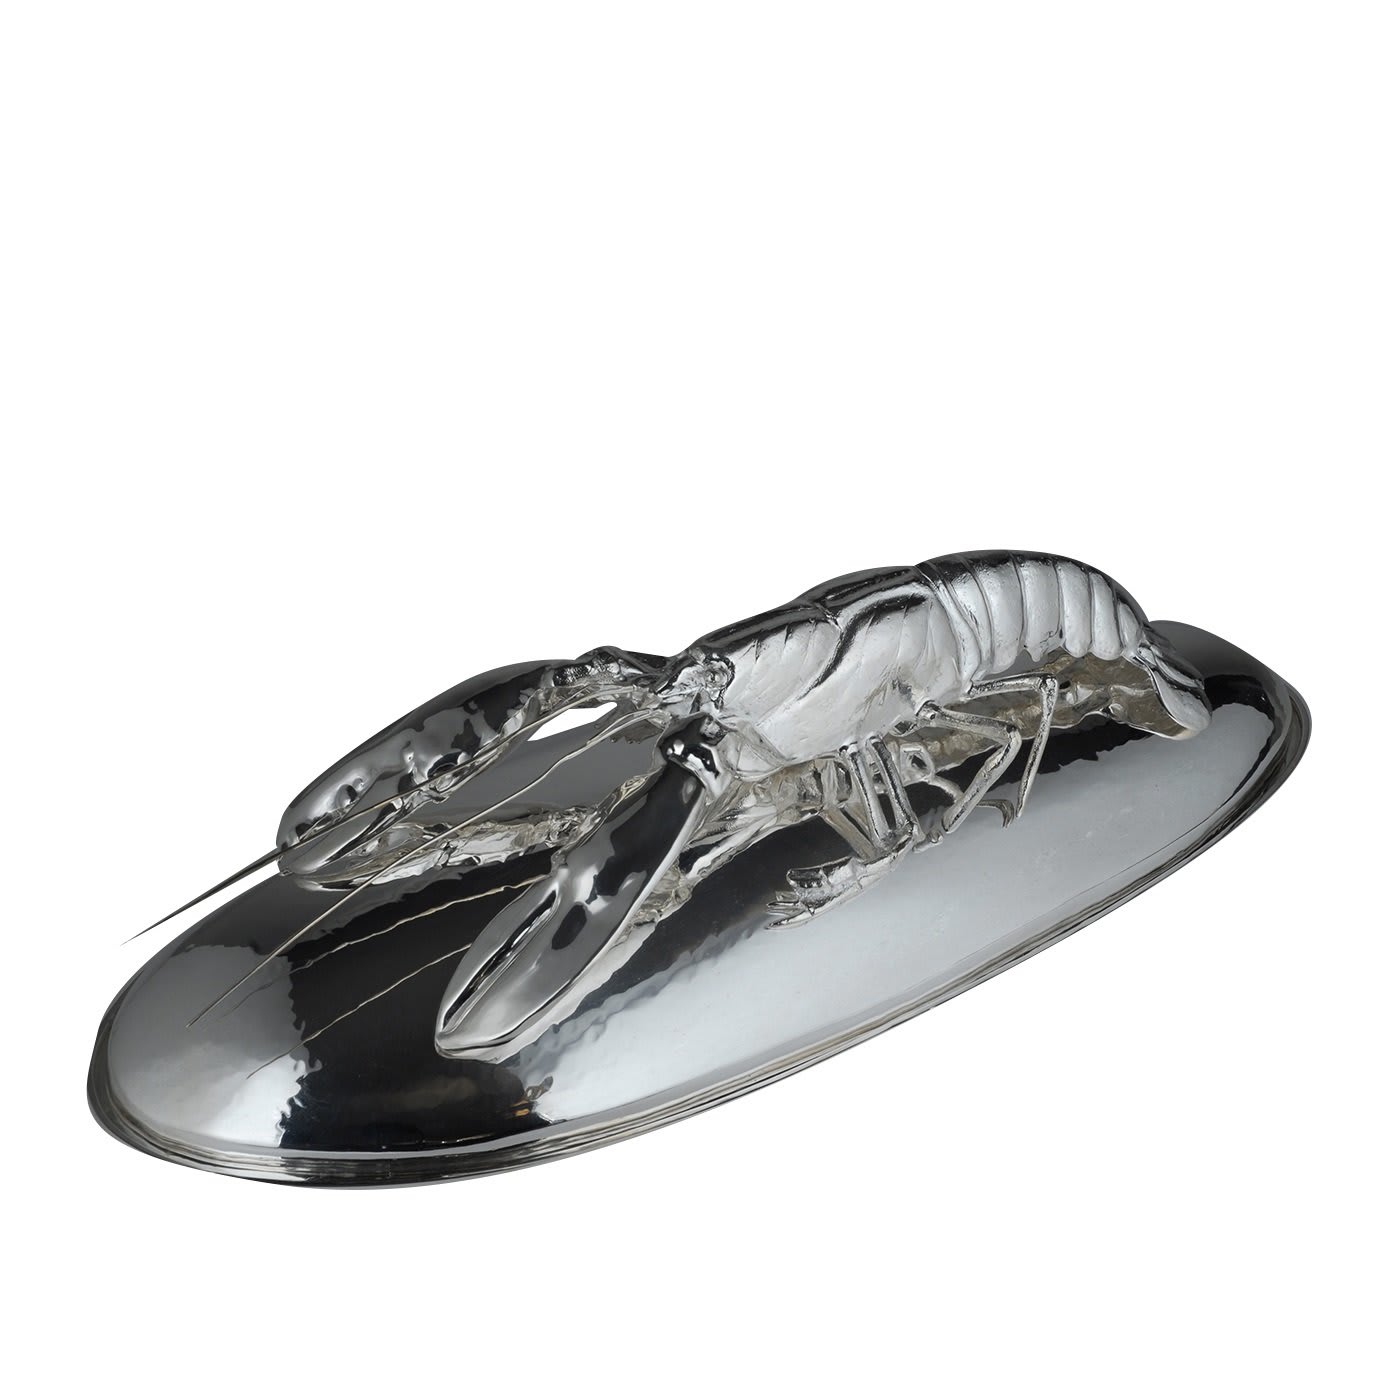 Long Oval Tray with Lid and Lobster Decoration - Franco Lapini